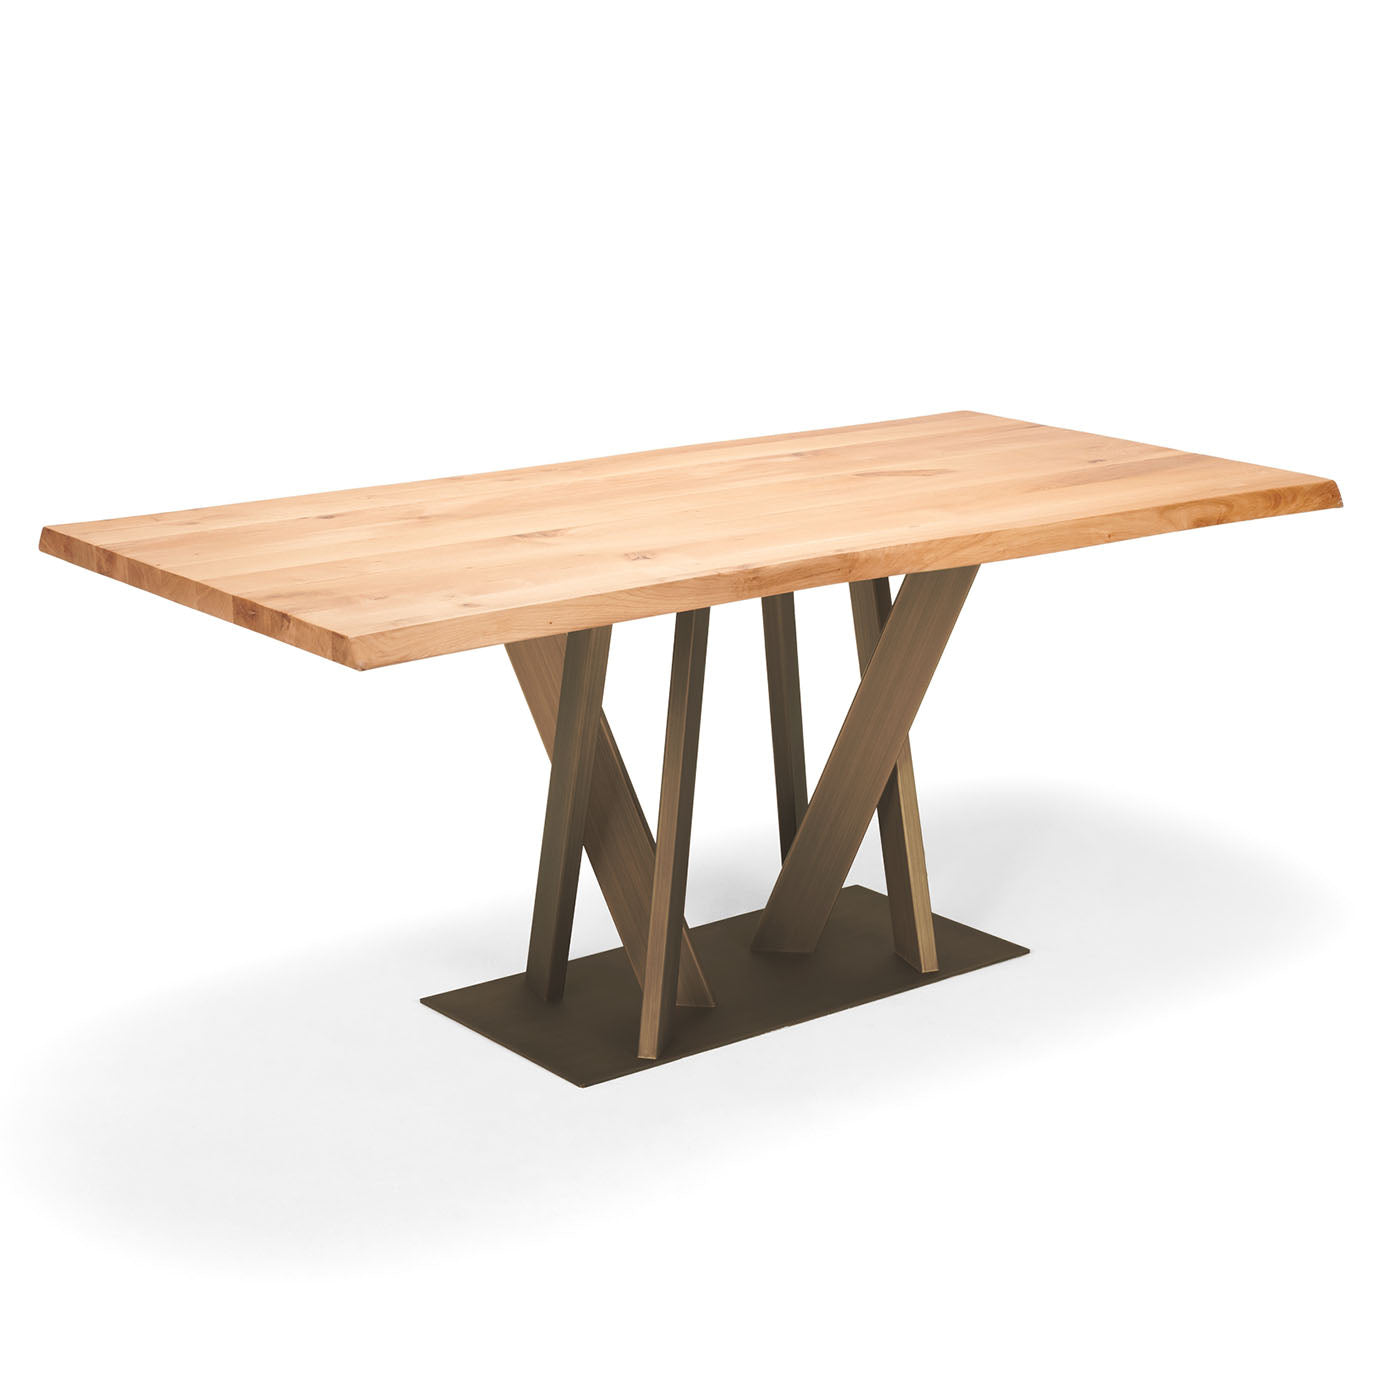 Tree Wood and Burnished Steel Dining Table by Luca Roccadadria - Alternative view 1